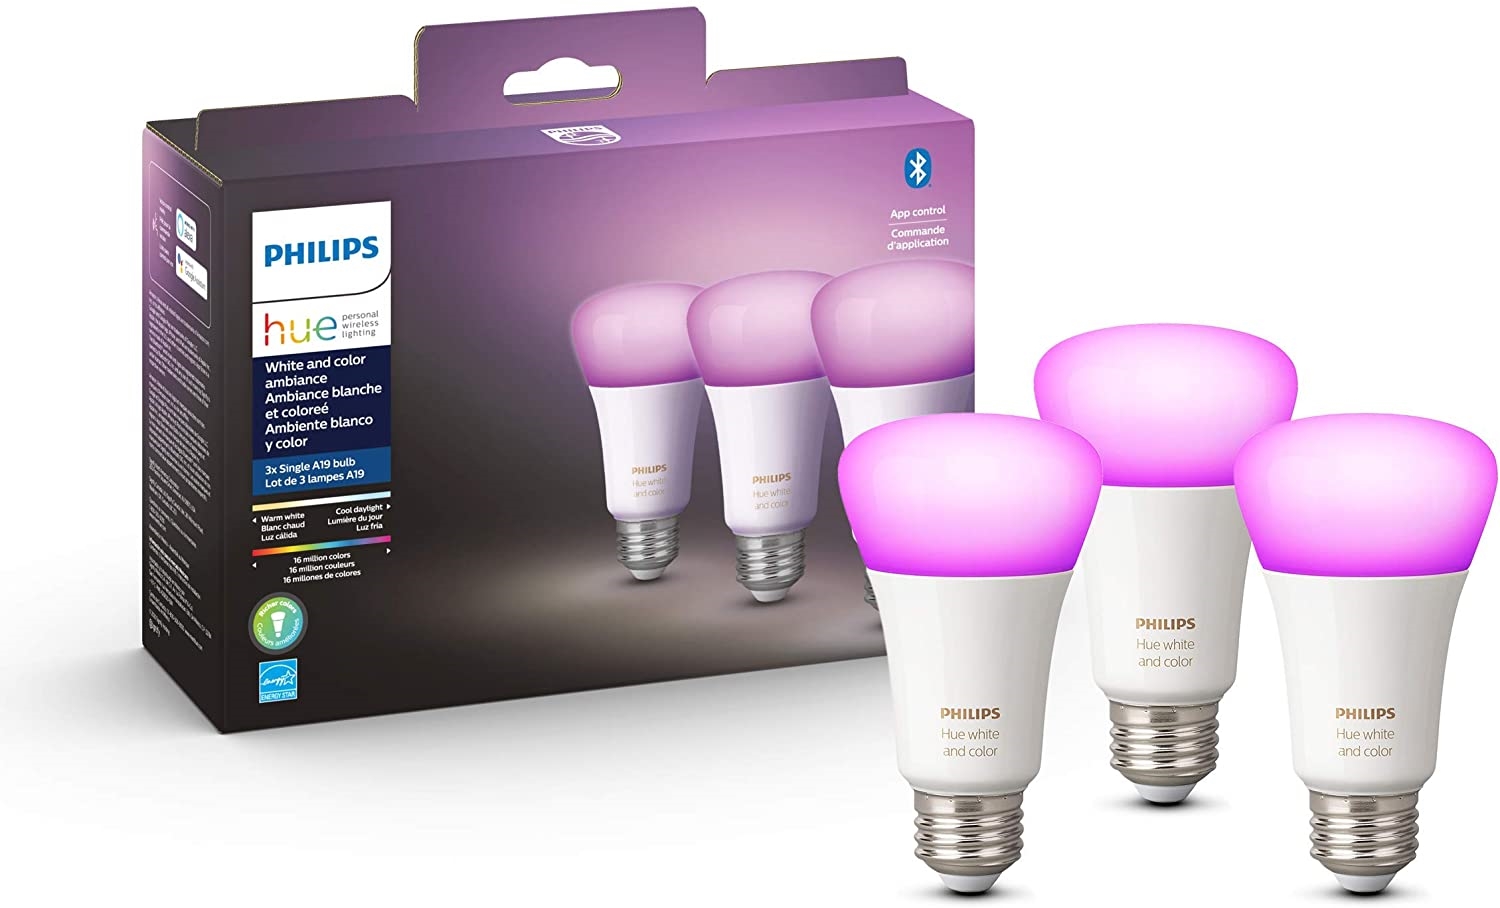 Amazon drops the price of Philips Hue products in early Black Friday sale | DeviceDaily.com